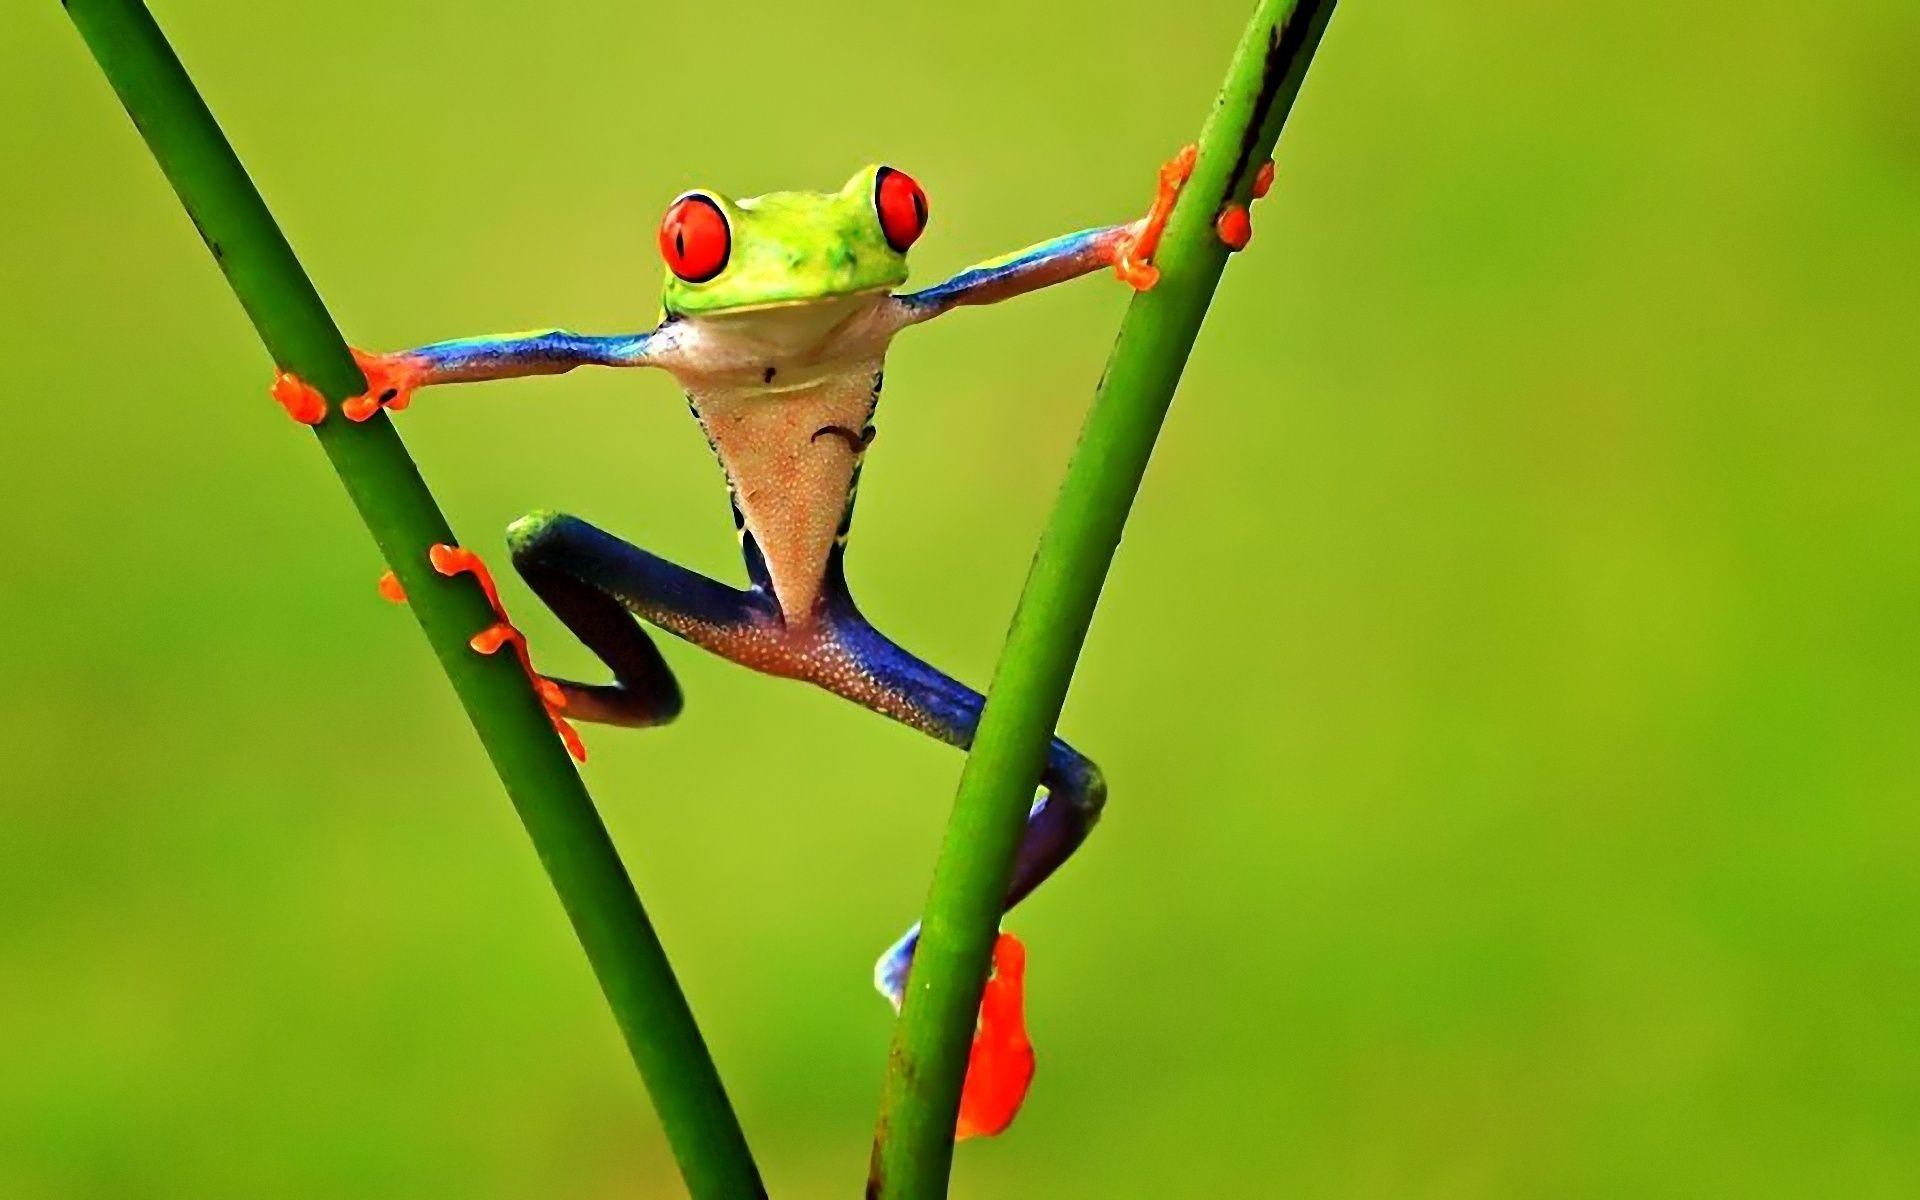 Tree Frog Wallpapers